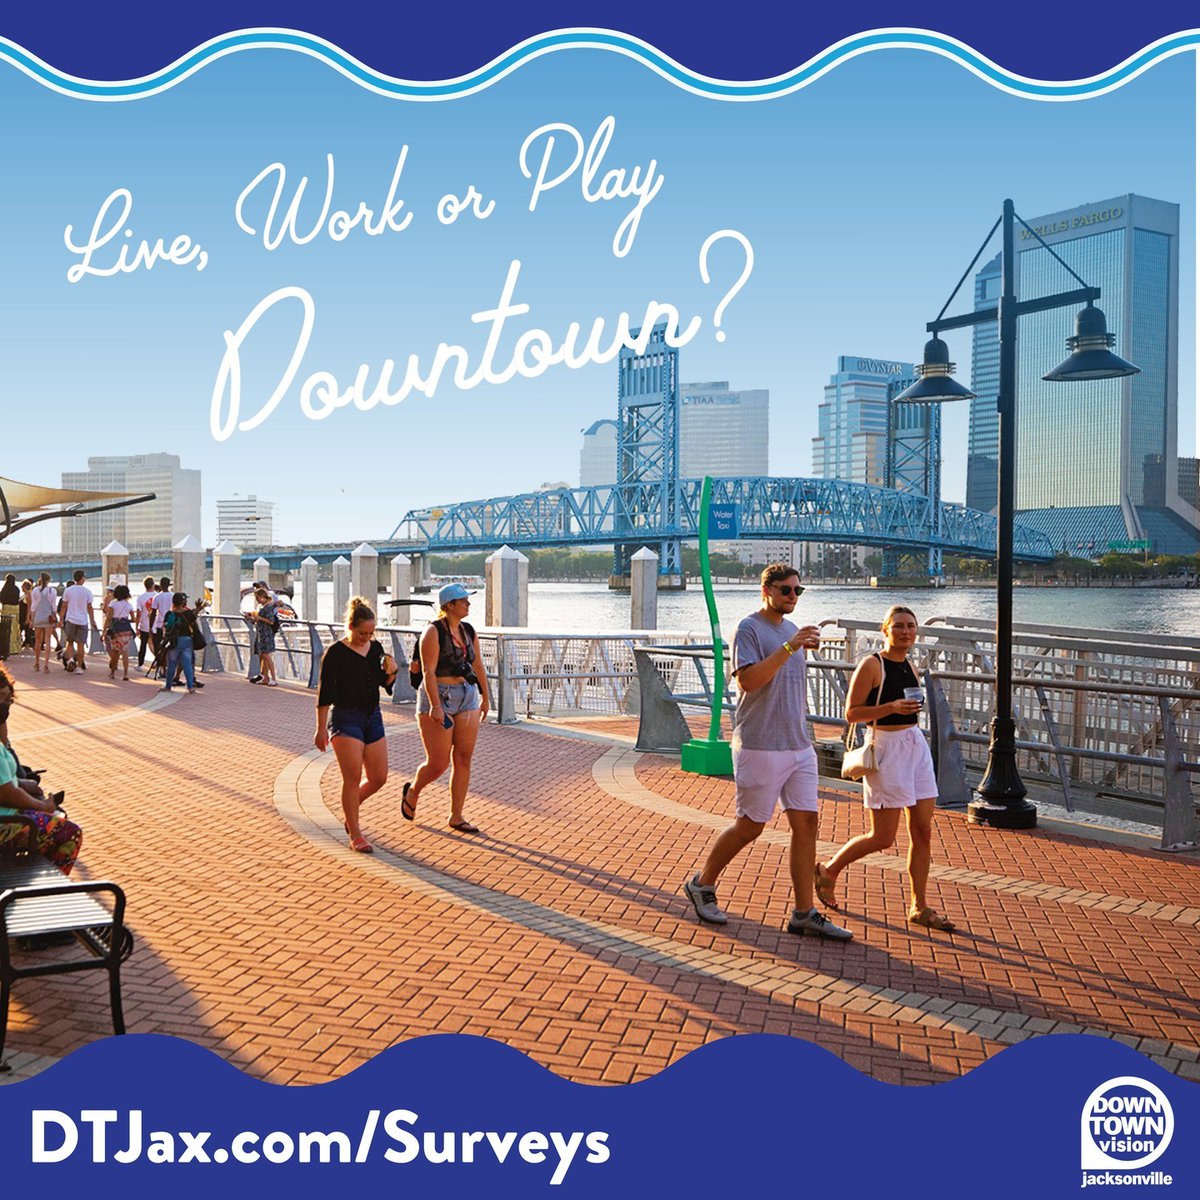 Do you live, work or play in Downtown Jacksonville? We want to hear from you! Take the surveys and provide an email address to be entered into a drawing to win one of five #DTJax e-Gift Cards. Learn More and Take the Survey: DTJax.com/surveys